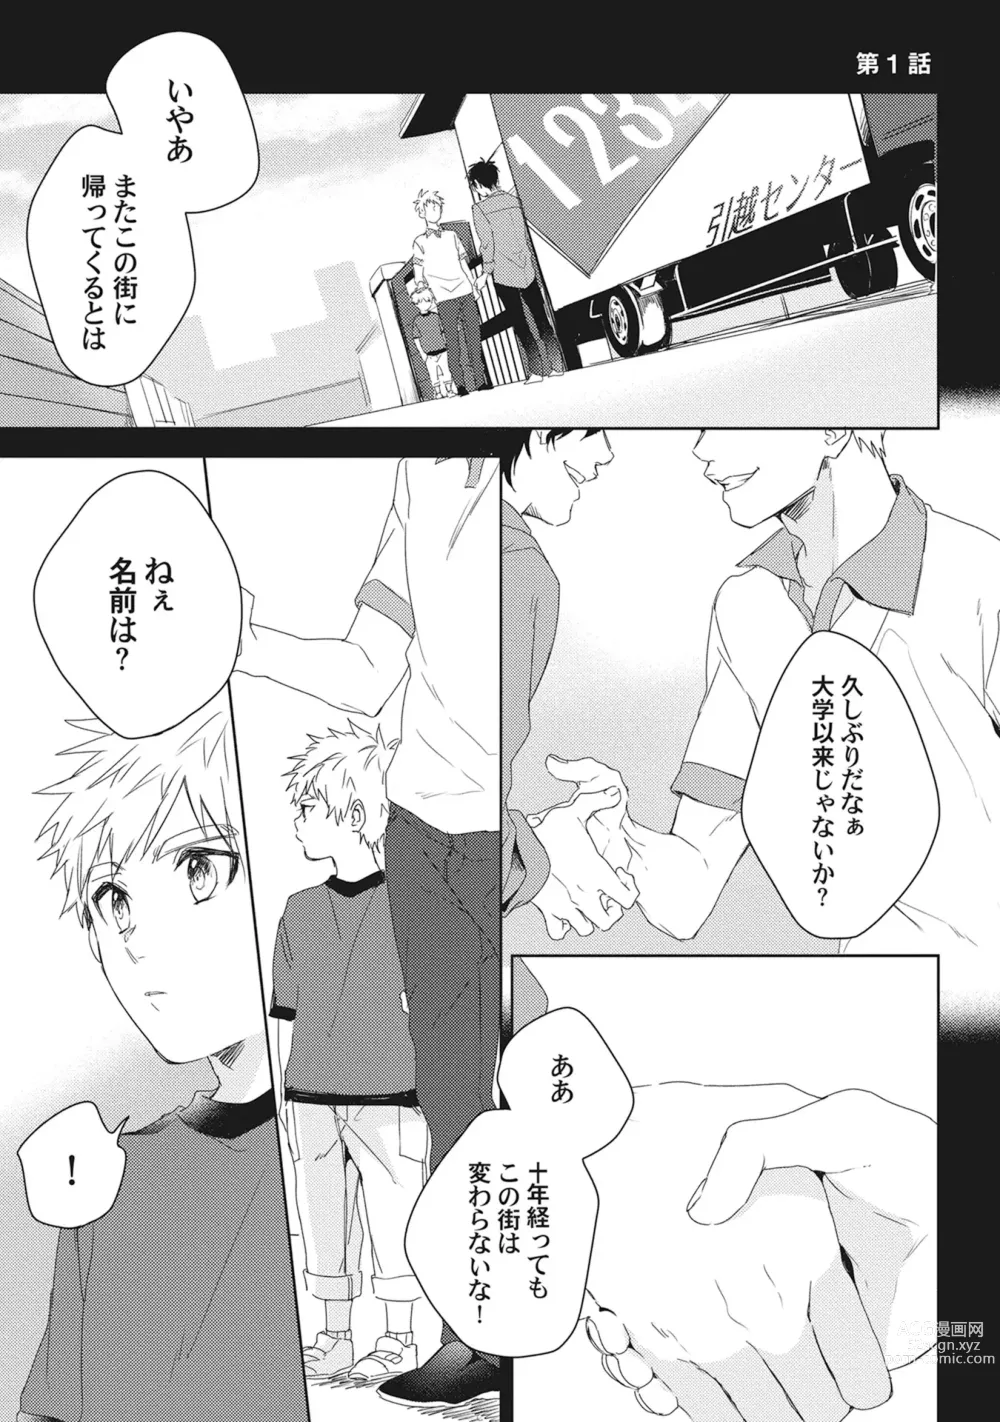 Page 5 of manga Ore o Mite. - I want you to see me.